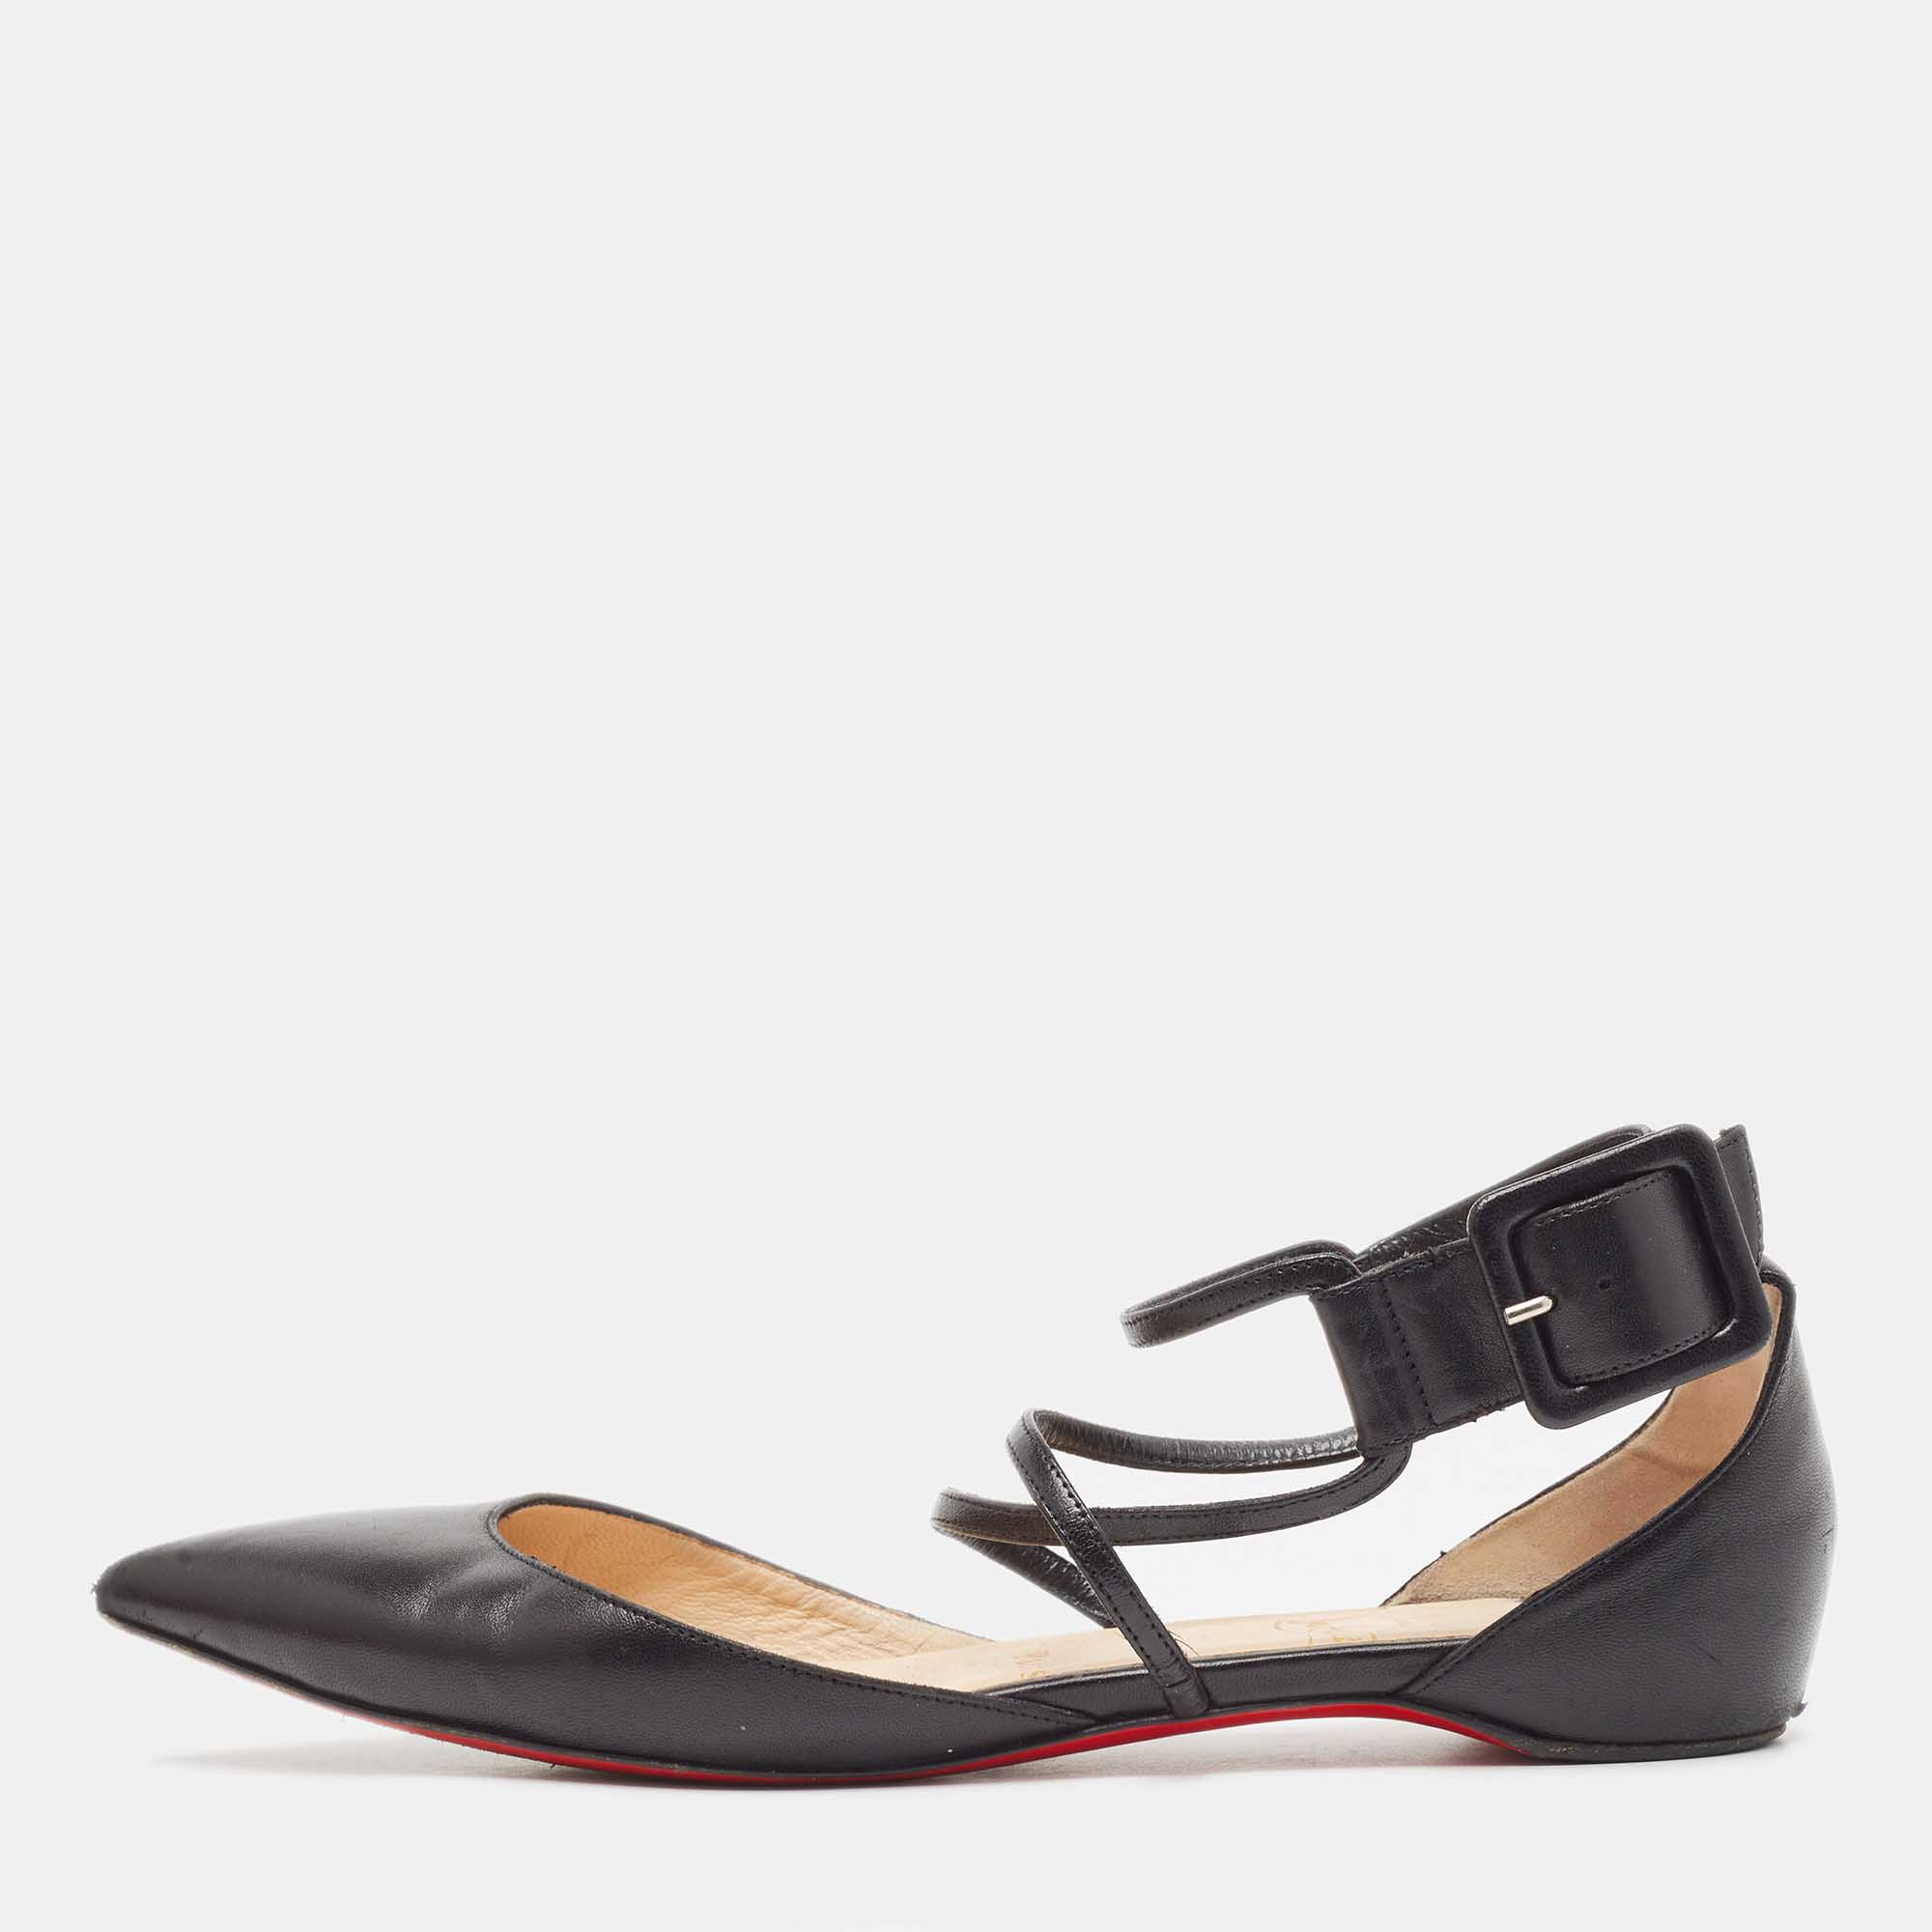 Pre-owned Christian Louboutin Black Leather Suzanna Ankle Strap Flats Size 37.5